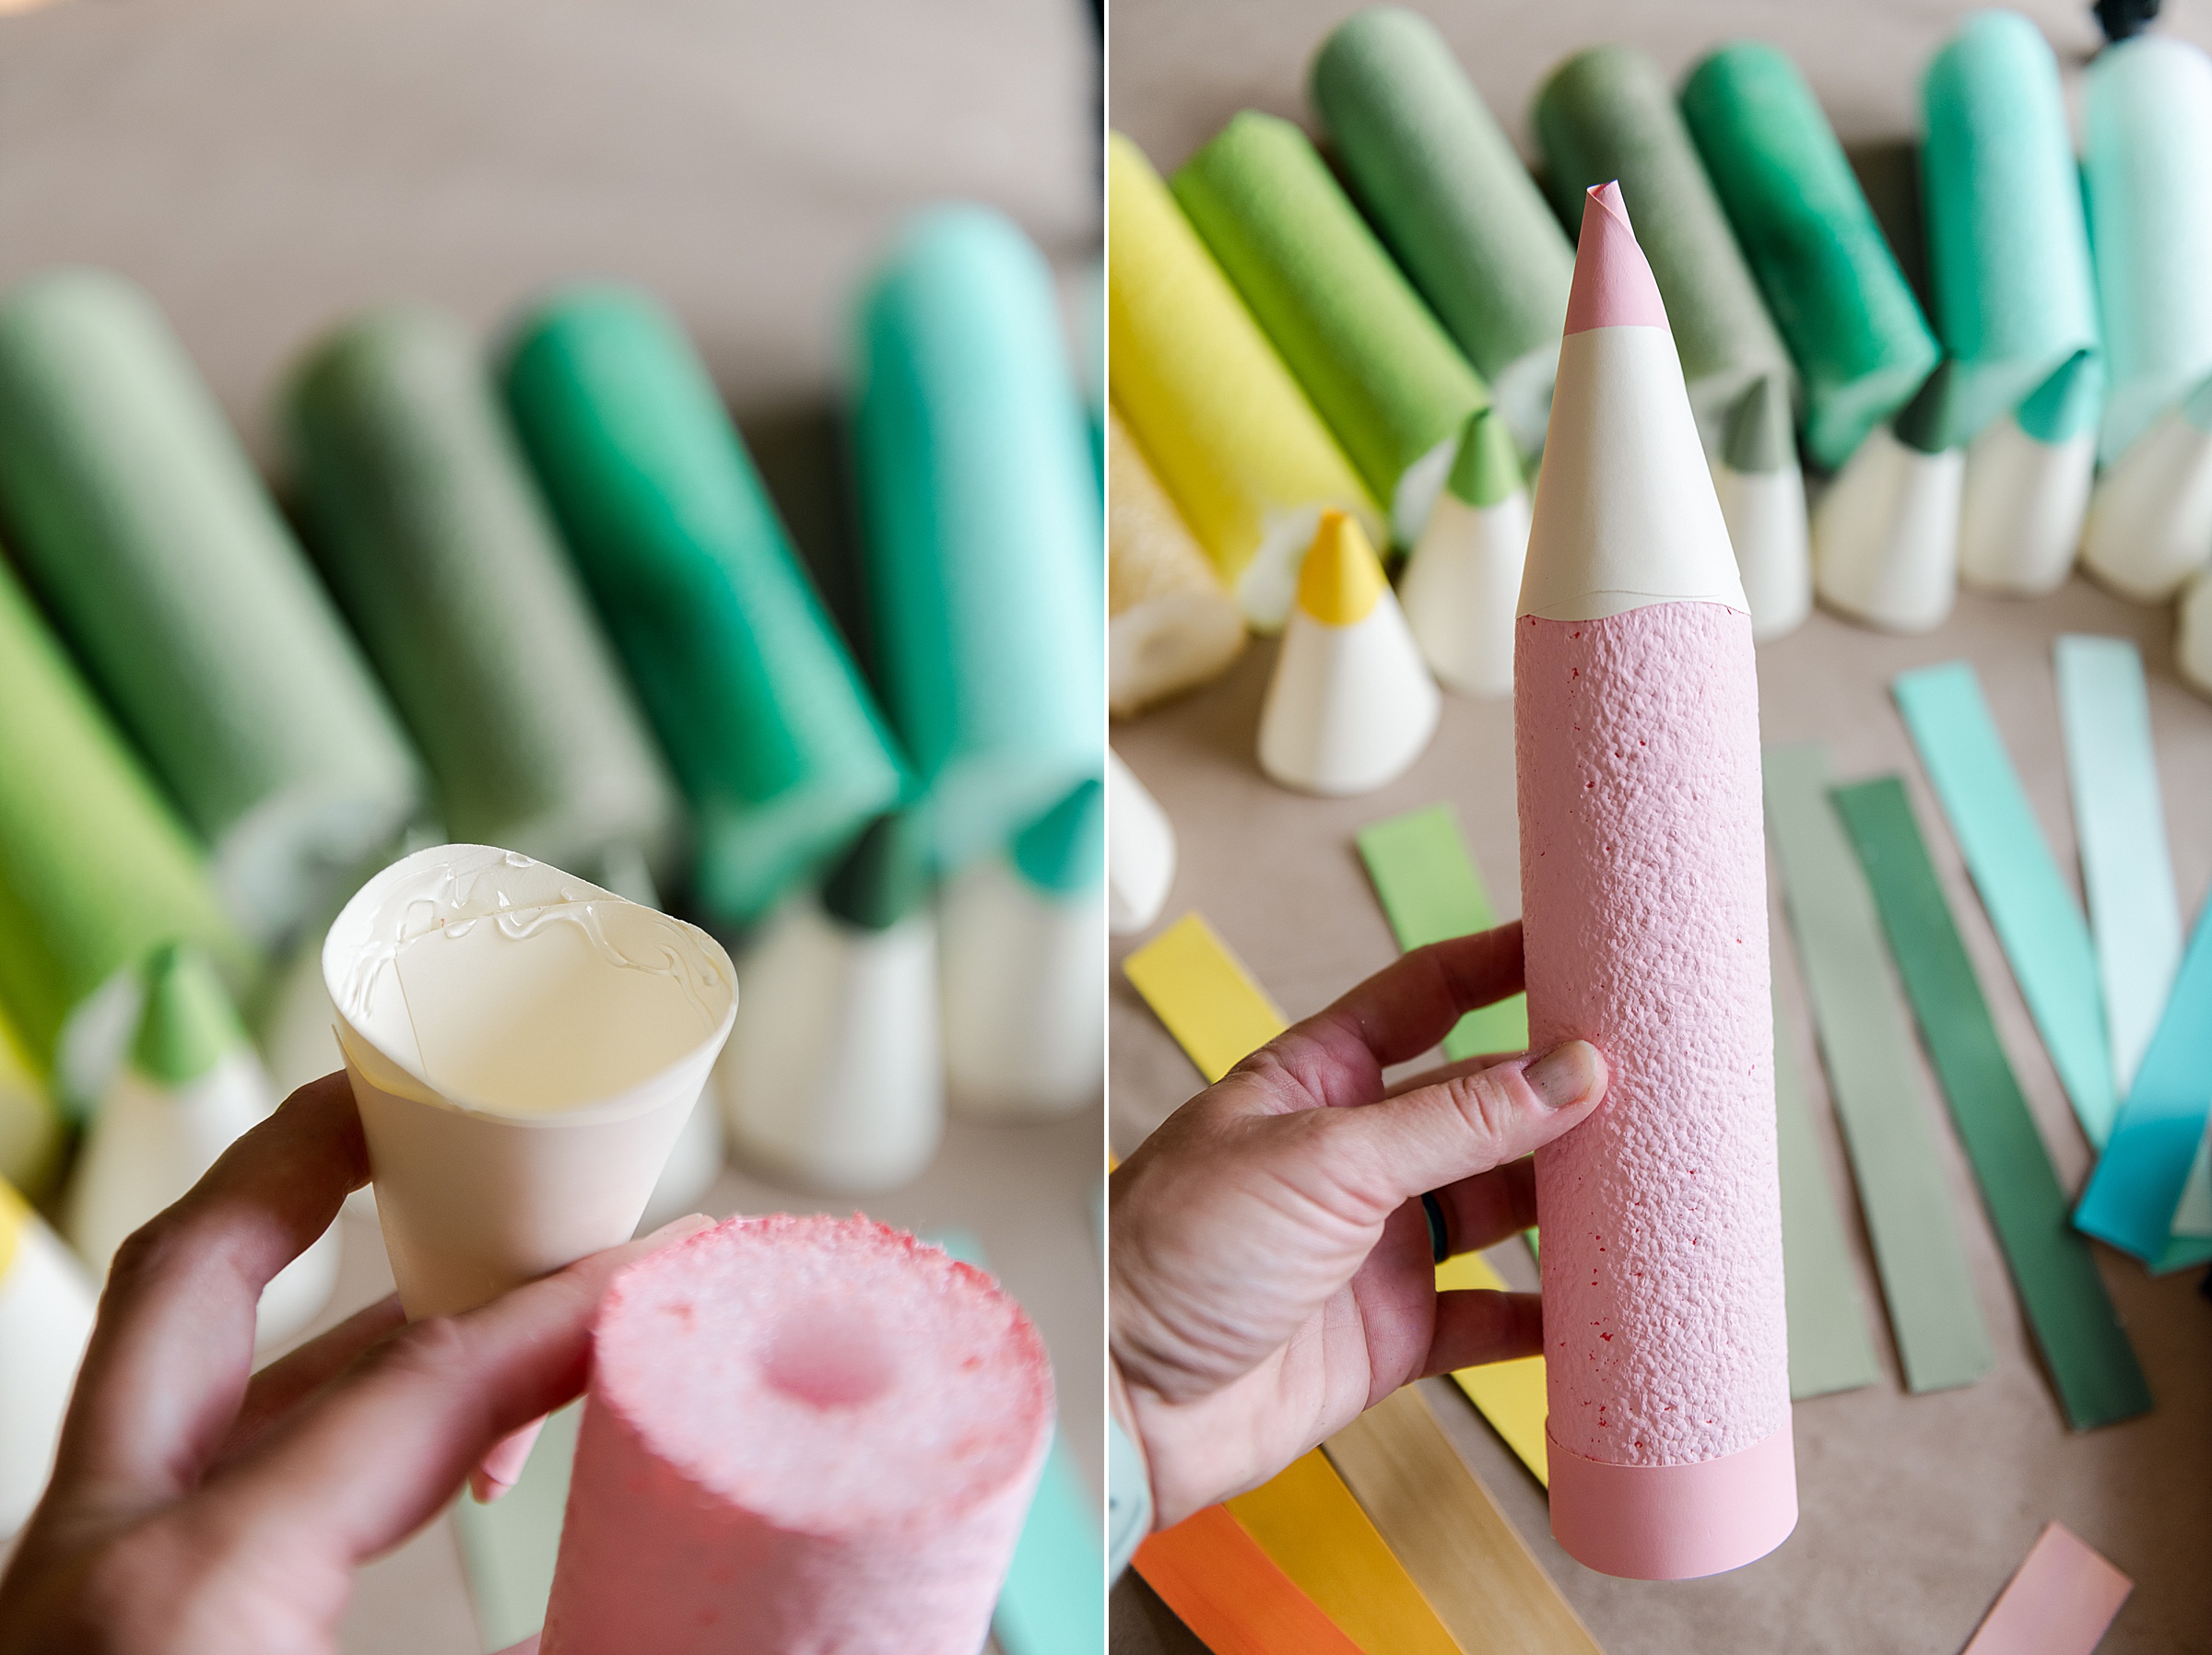 How to make colored pencils from pool noodles, pool noodle crafts, teacher decor, classroom decor ideas, how to make pencils from pool noodles